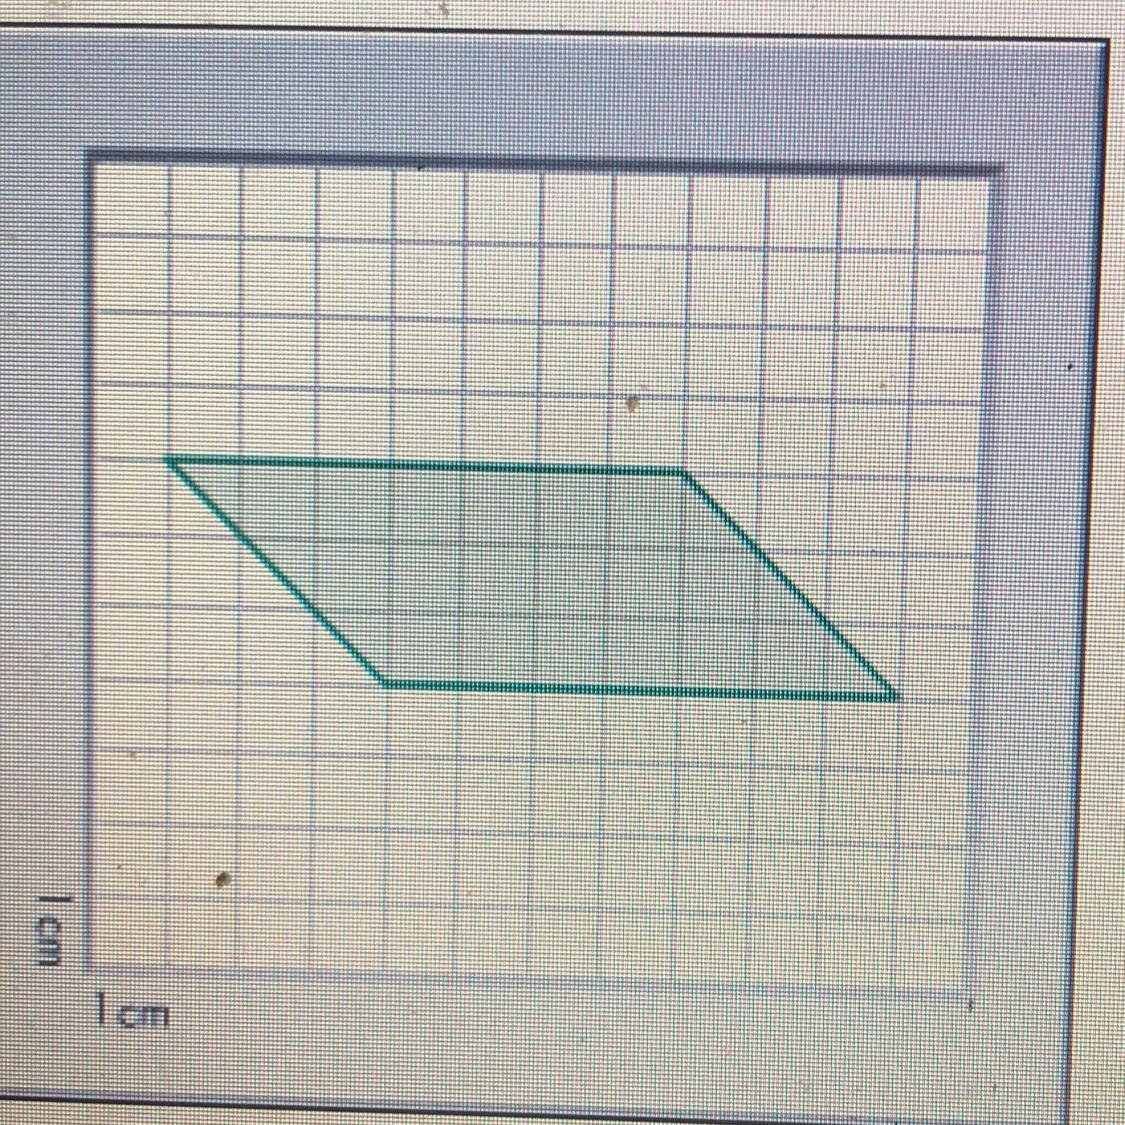 Question 1 Of 10 What Is The Area, Measured In Square Centimeters, Of The Green Shape Pictured Below?